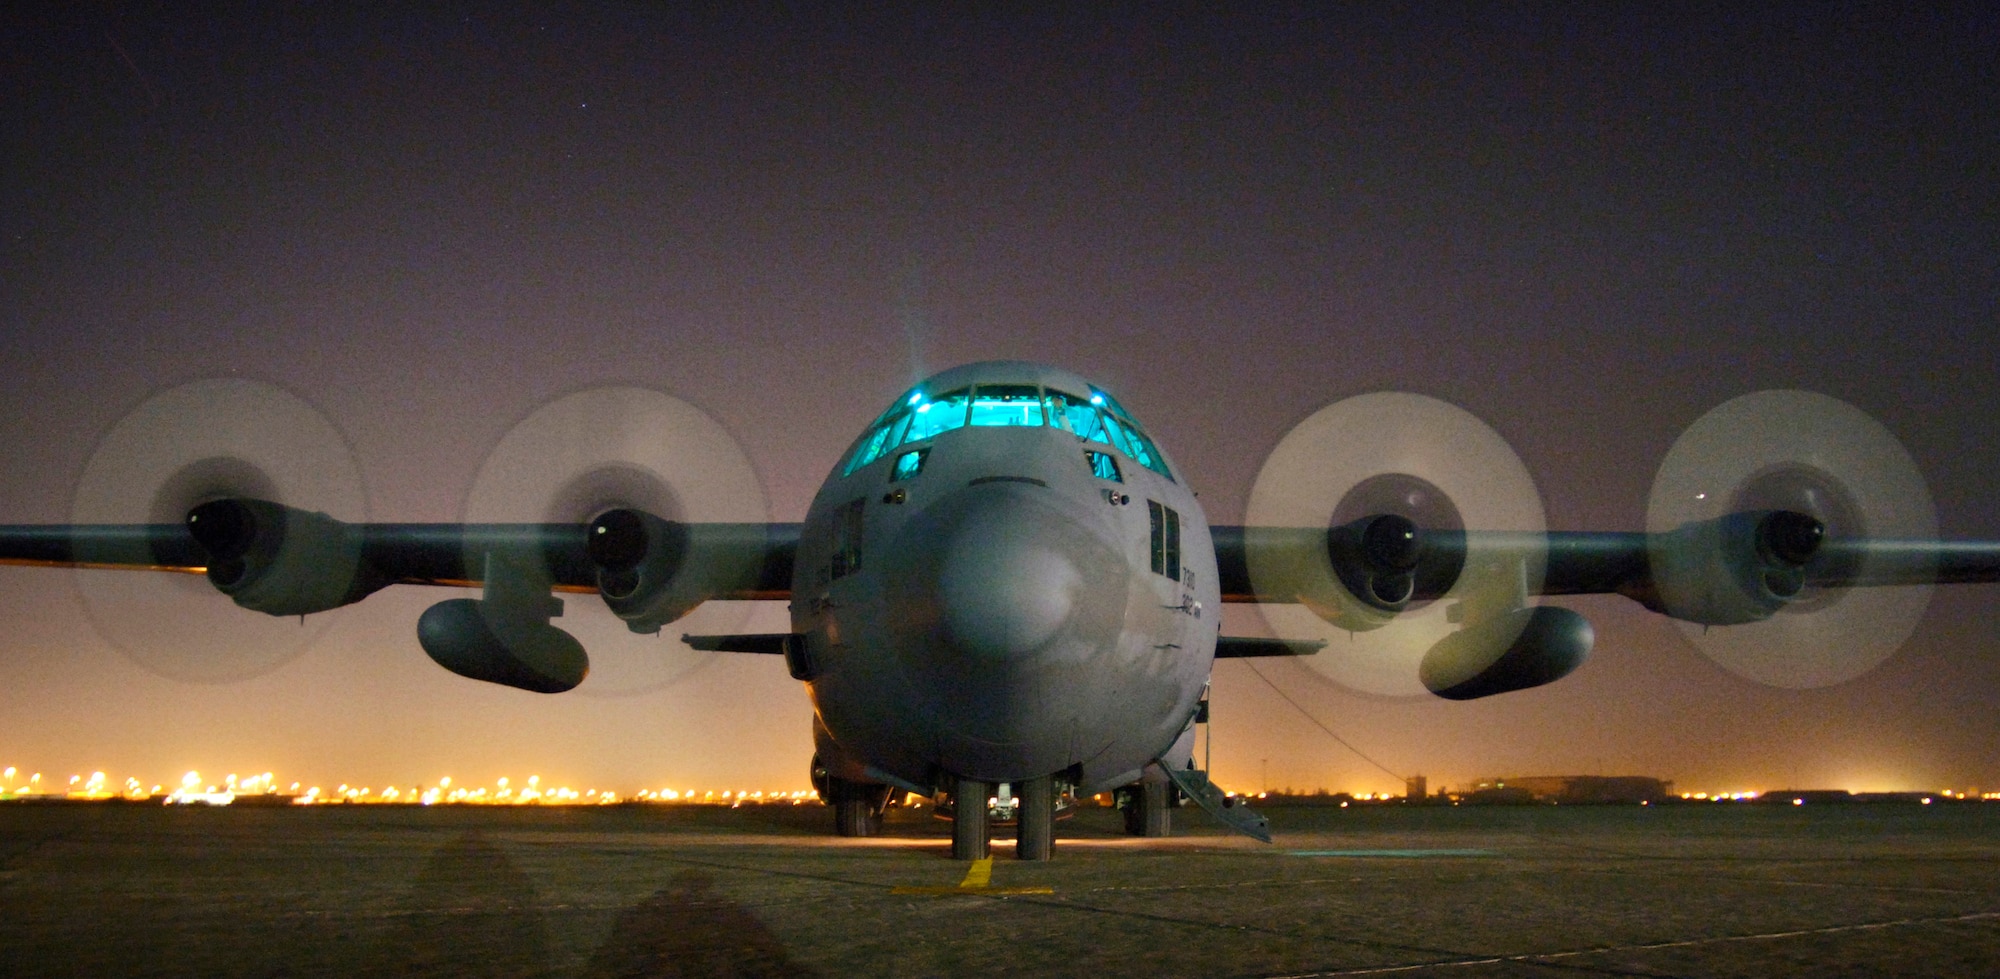 An Air Force Reserve C-130 Hercules is readied for takeoff at Sather Air Base, Iraq, on Wednesday, April 19, 2006. The aircraft is from the 302nd Airlift Wing at Peterson Air Force Base, Colo. (U.S. Air Force photo/Master Sgt. Lance Cheung) 
